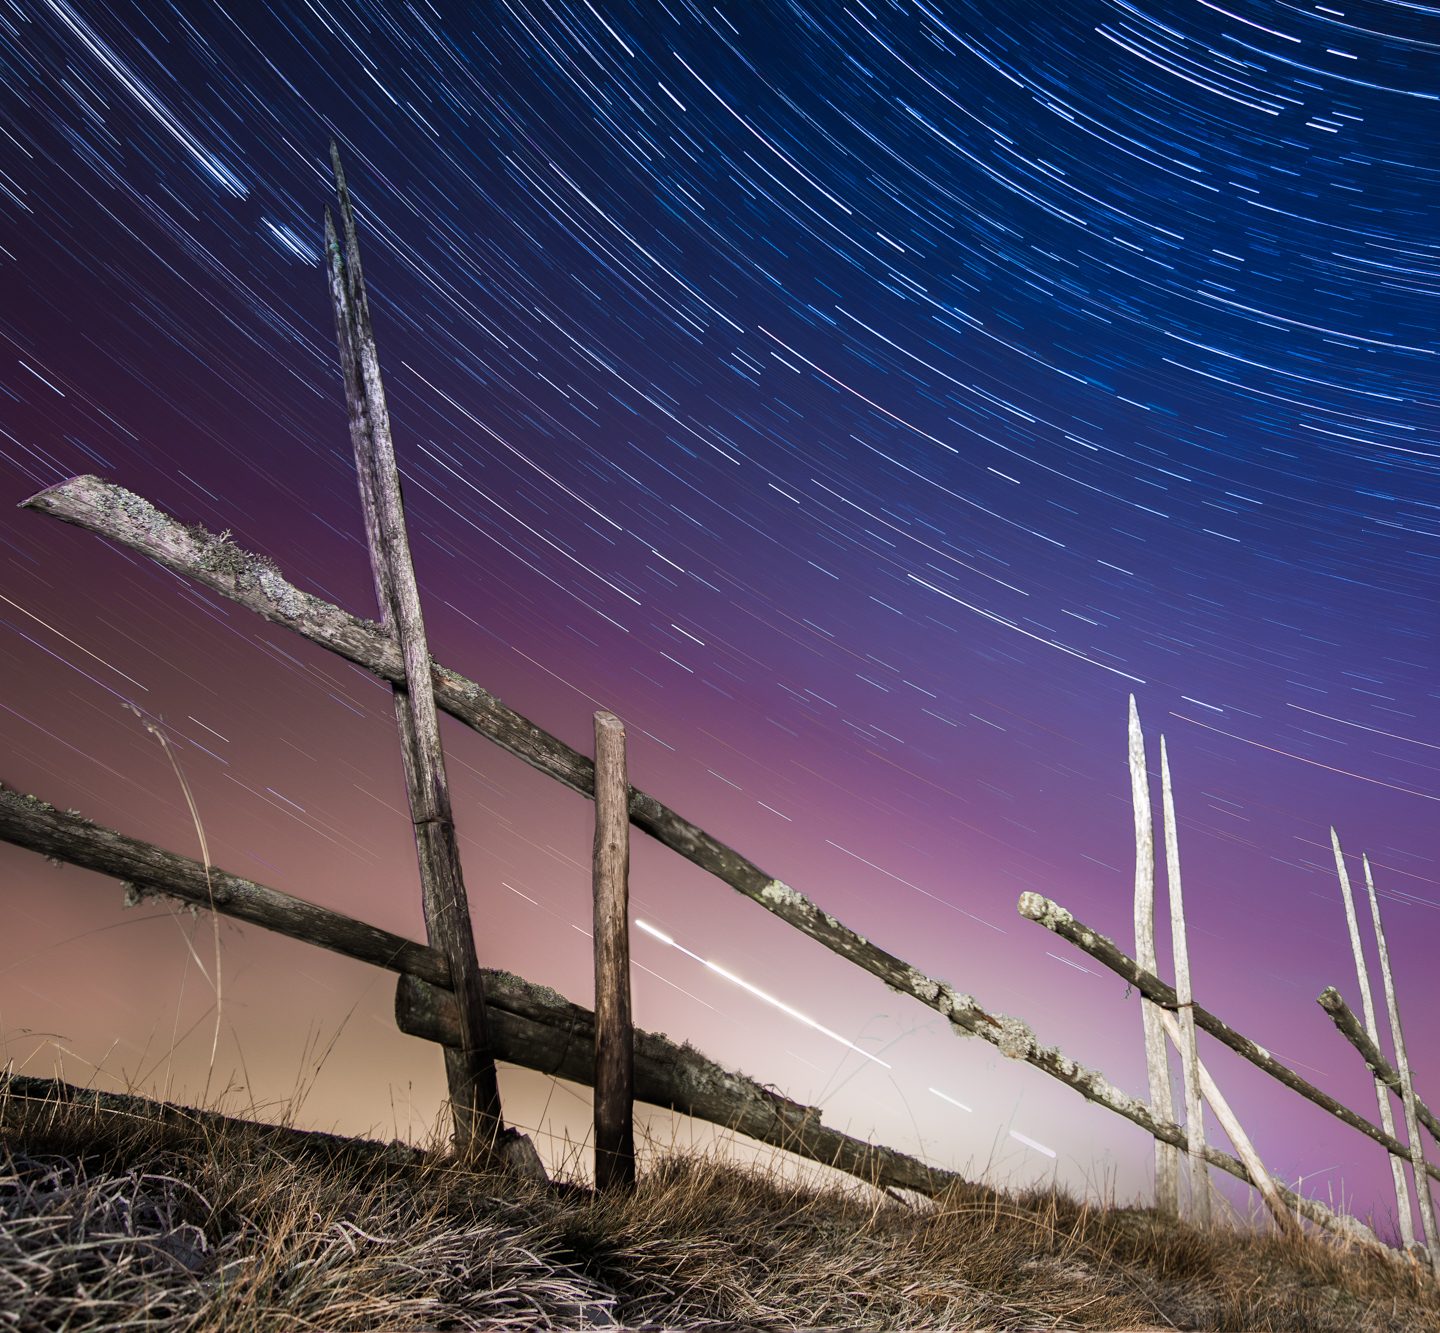 Star trails and light painting